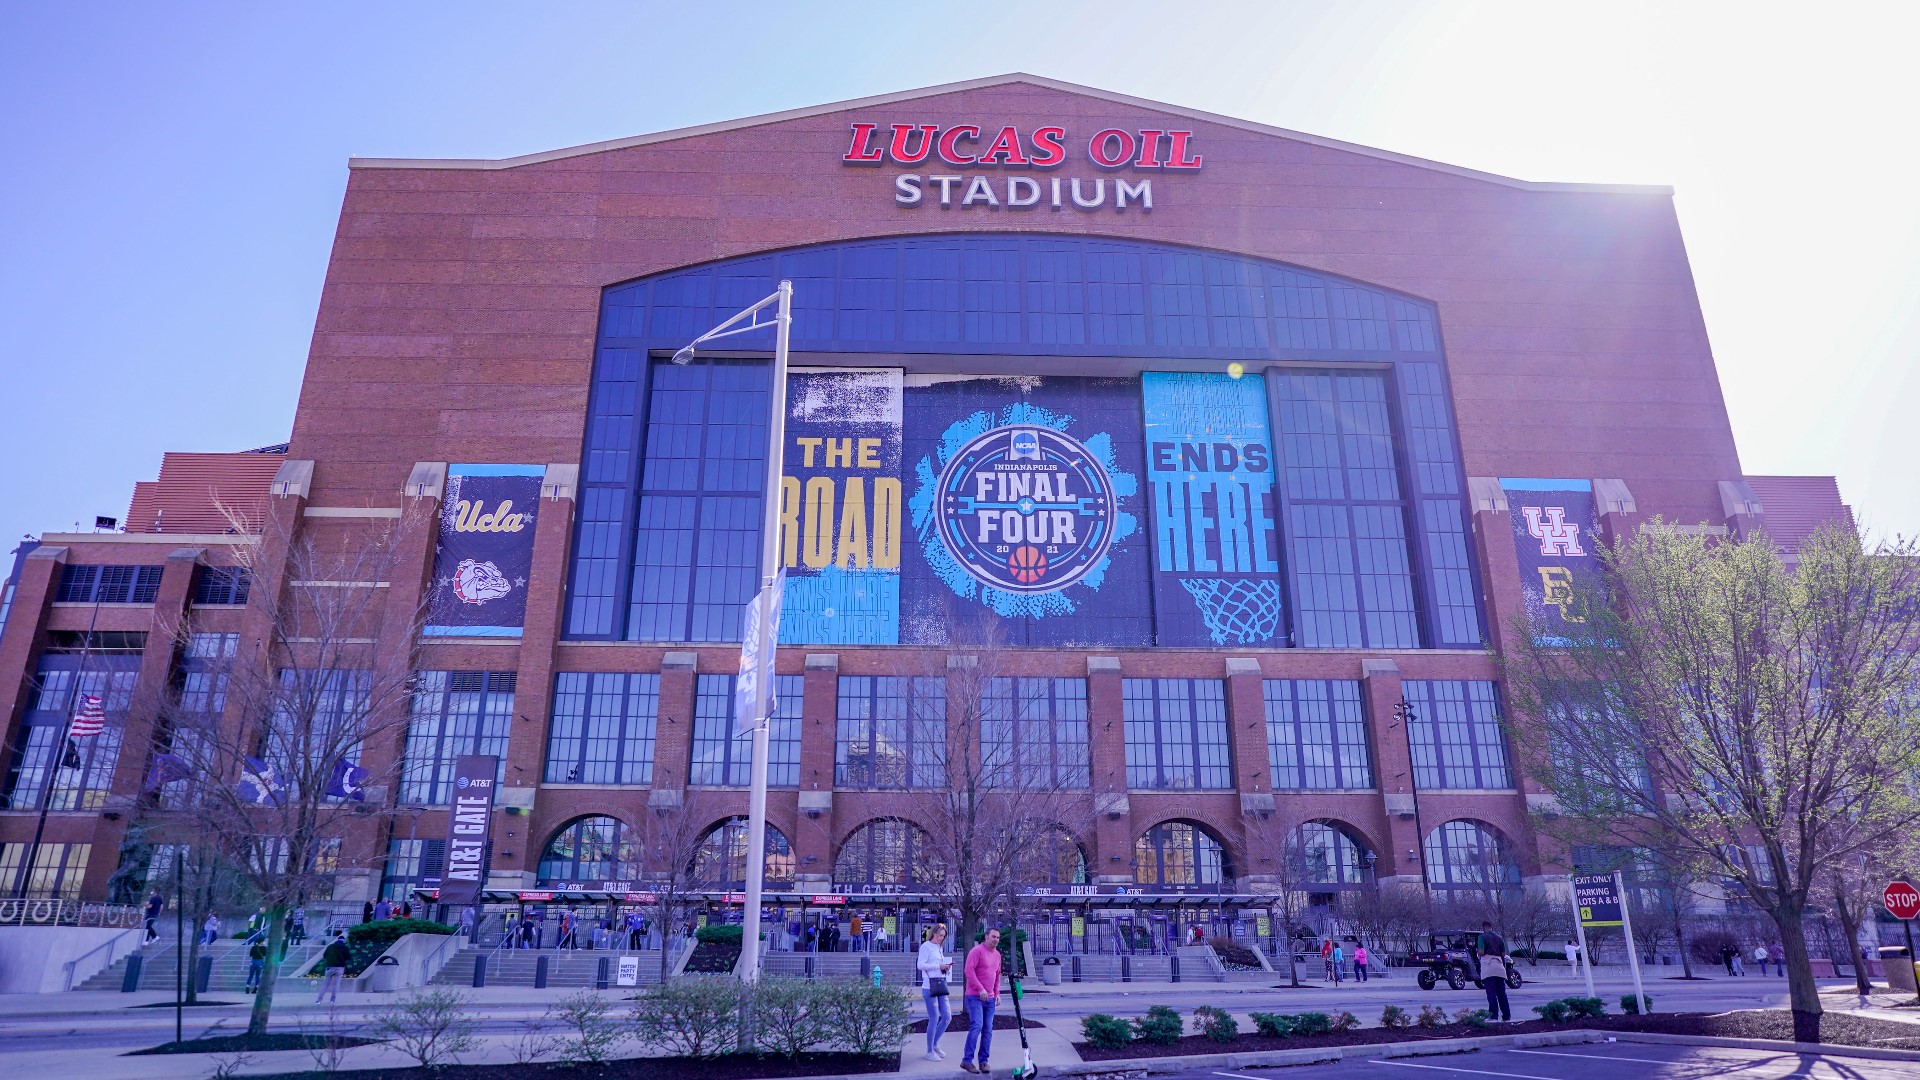 Lucas Oil Stadium was previously announced as the host site for the 2026 Final Four as well.